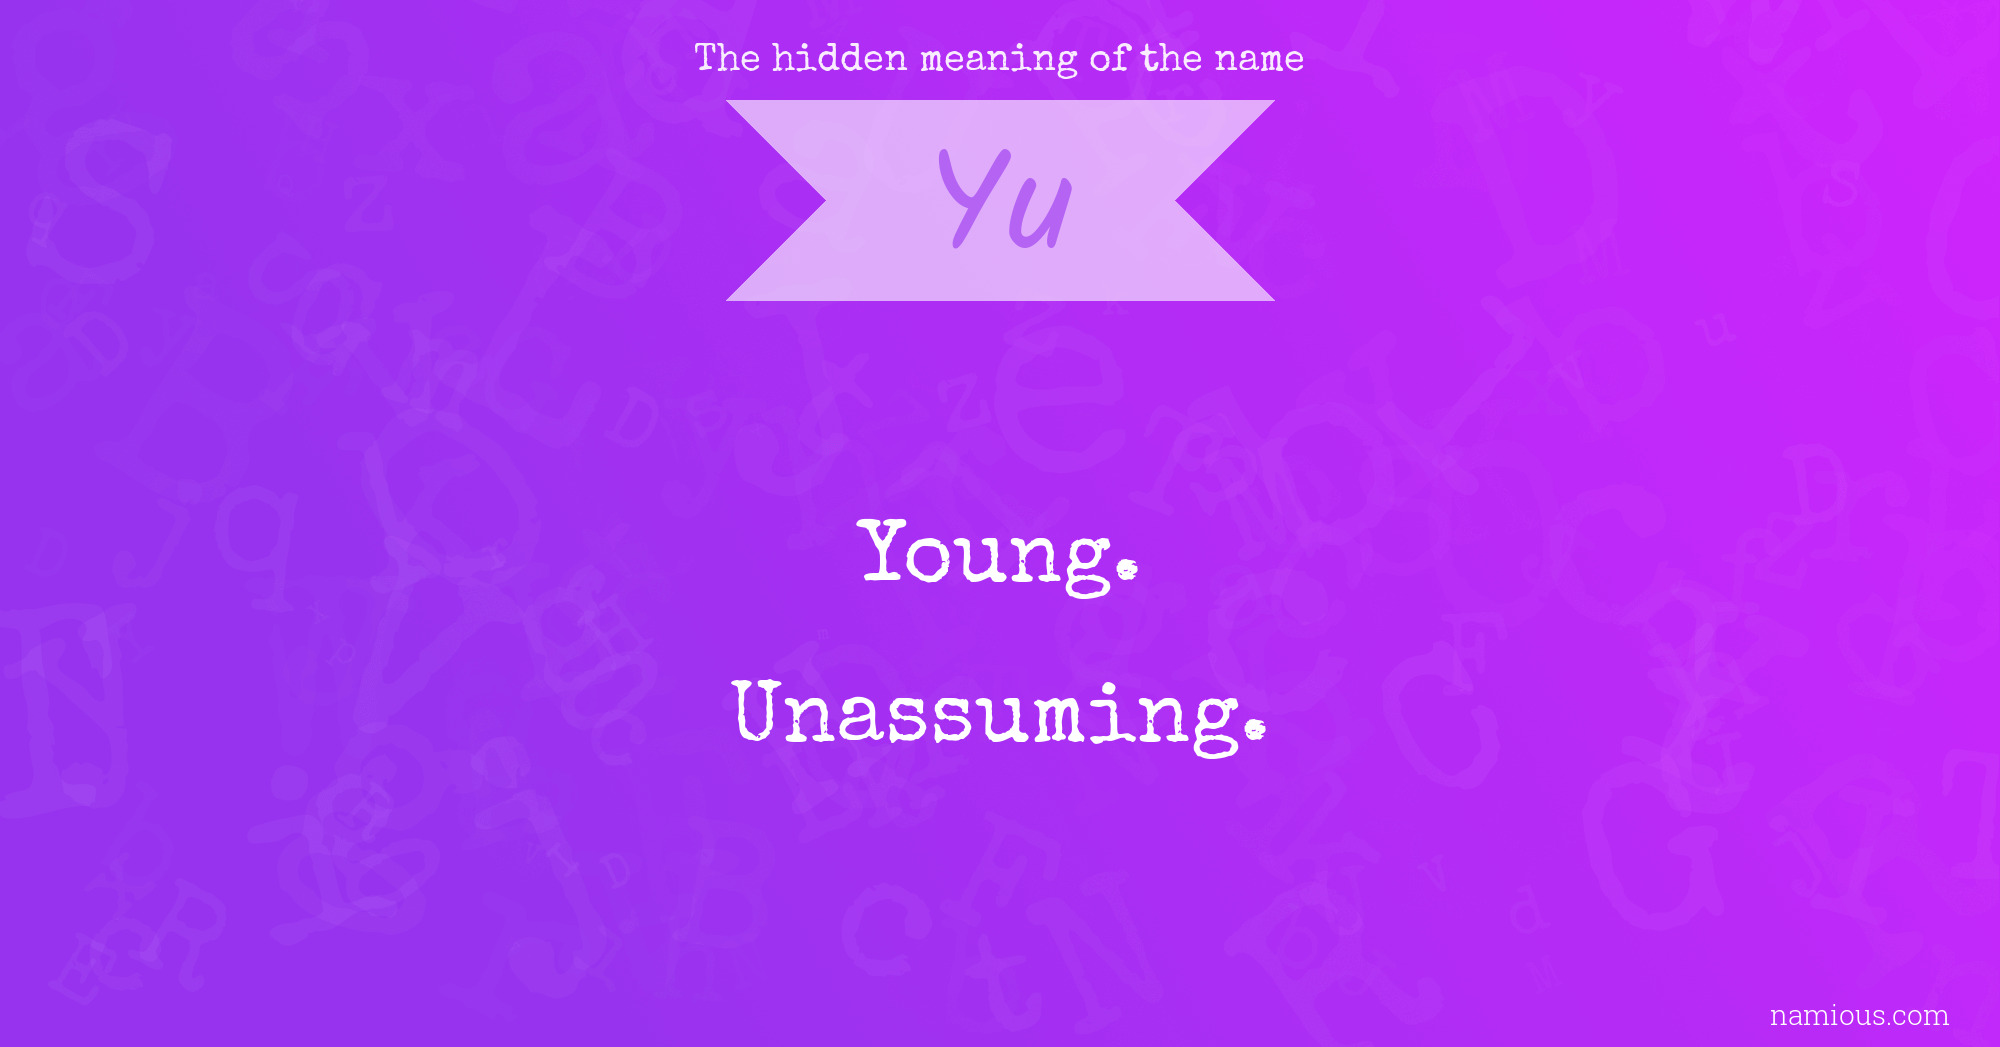 The hidden meaning of the name Yu